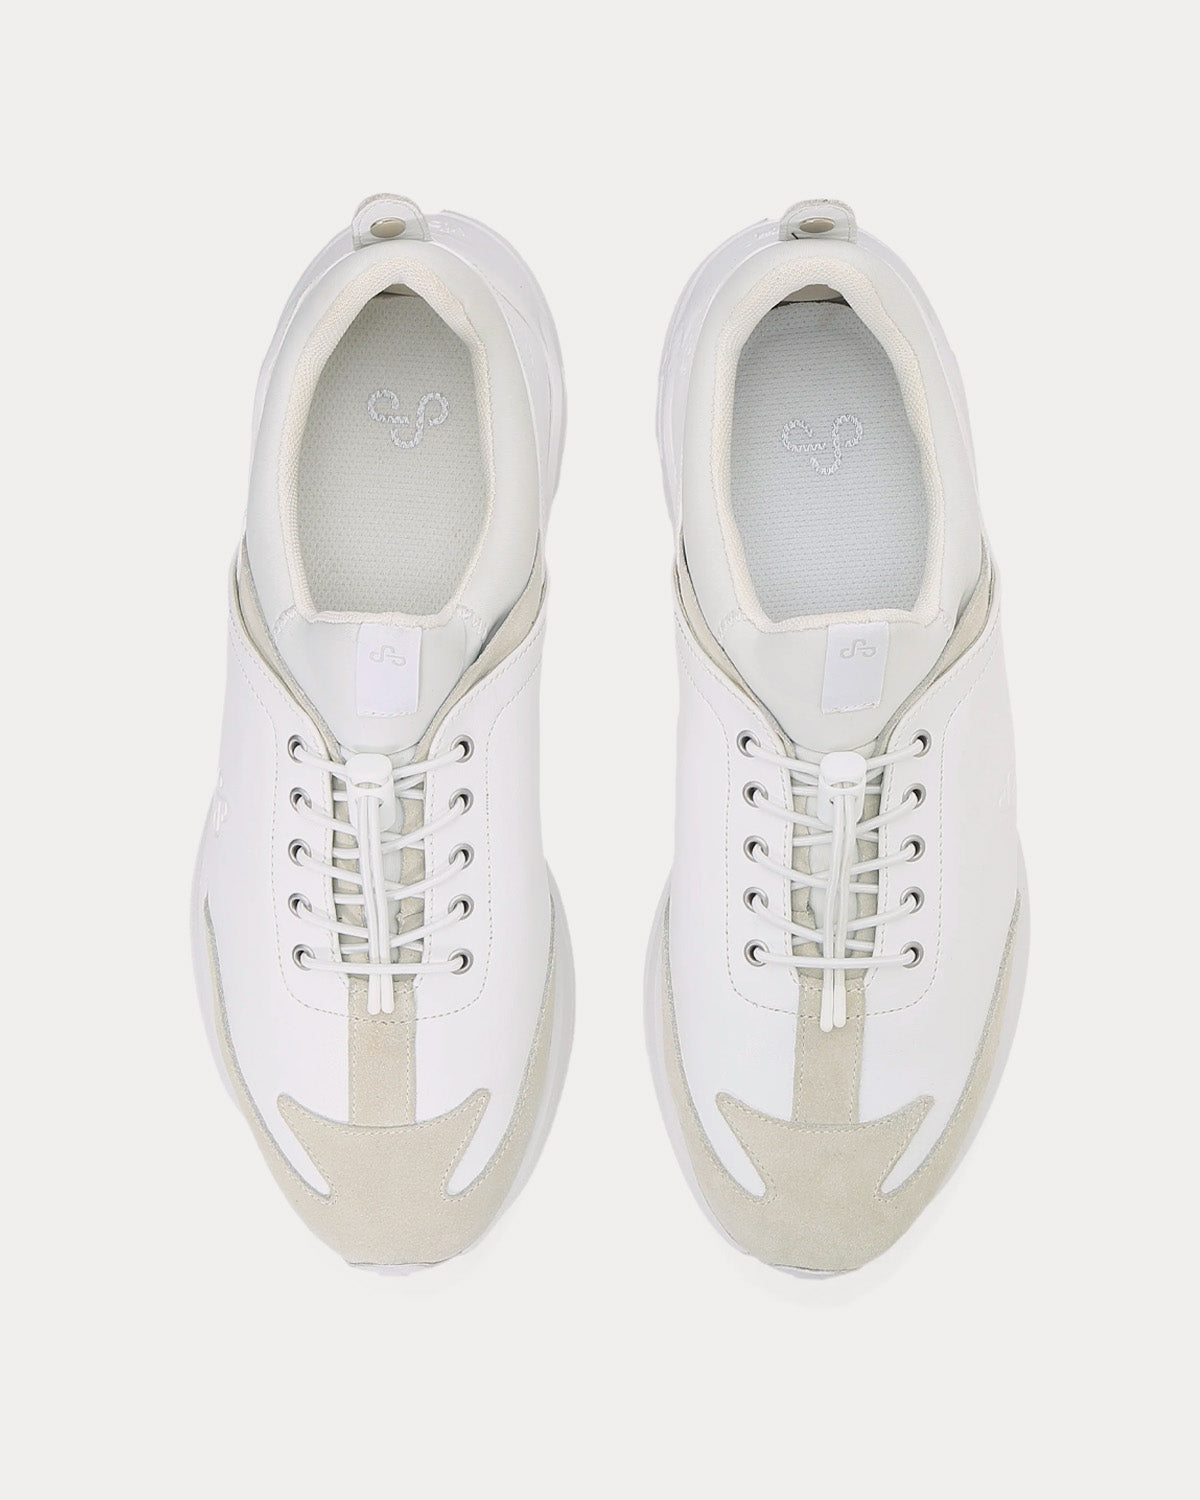 OAO - Mona White Low Top Sneakers